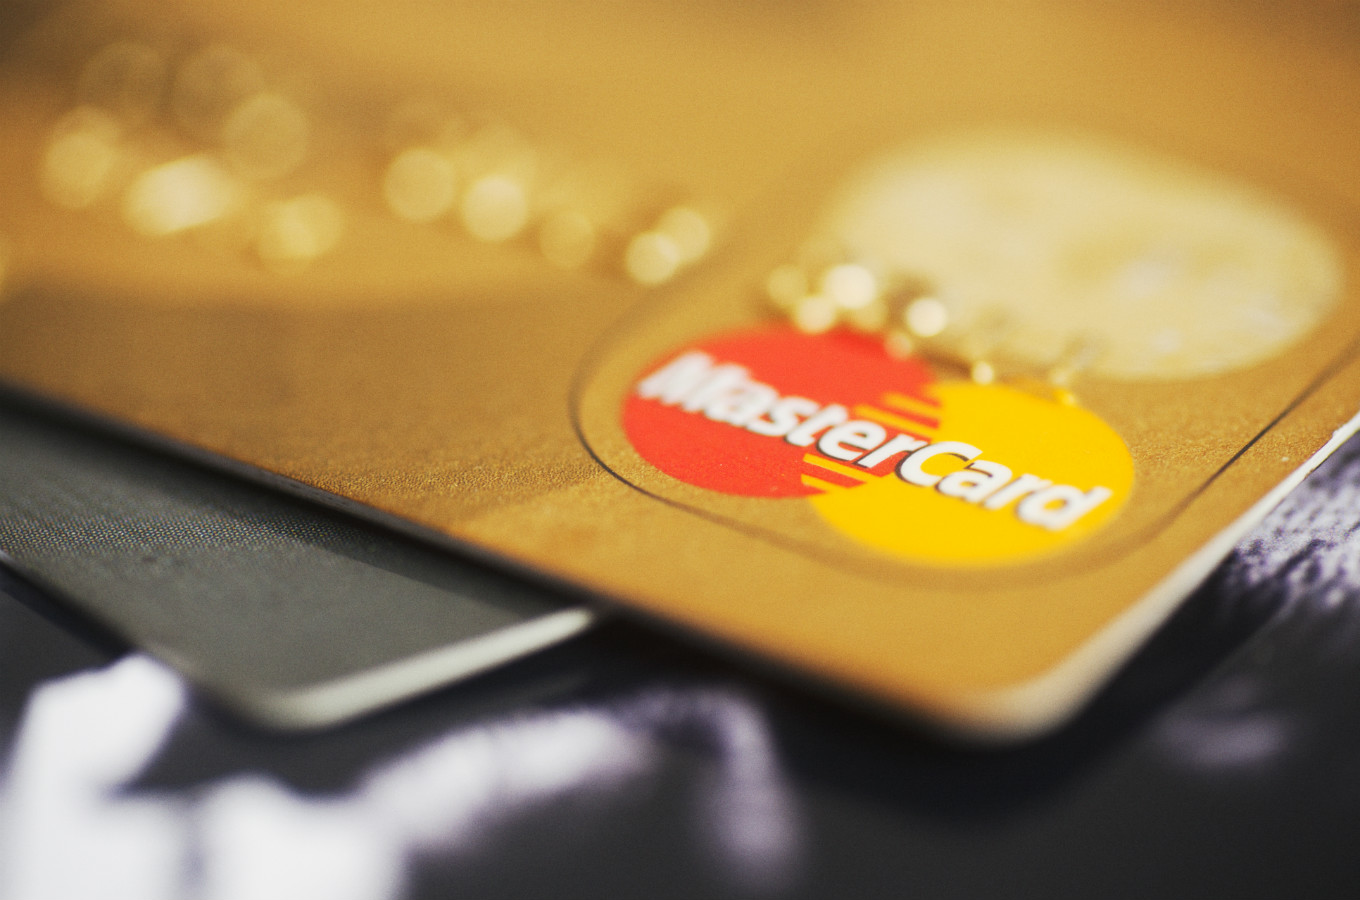 CEO Mastercard: Regulation wasn’t the only reason we left Libra 